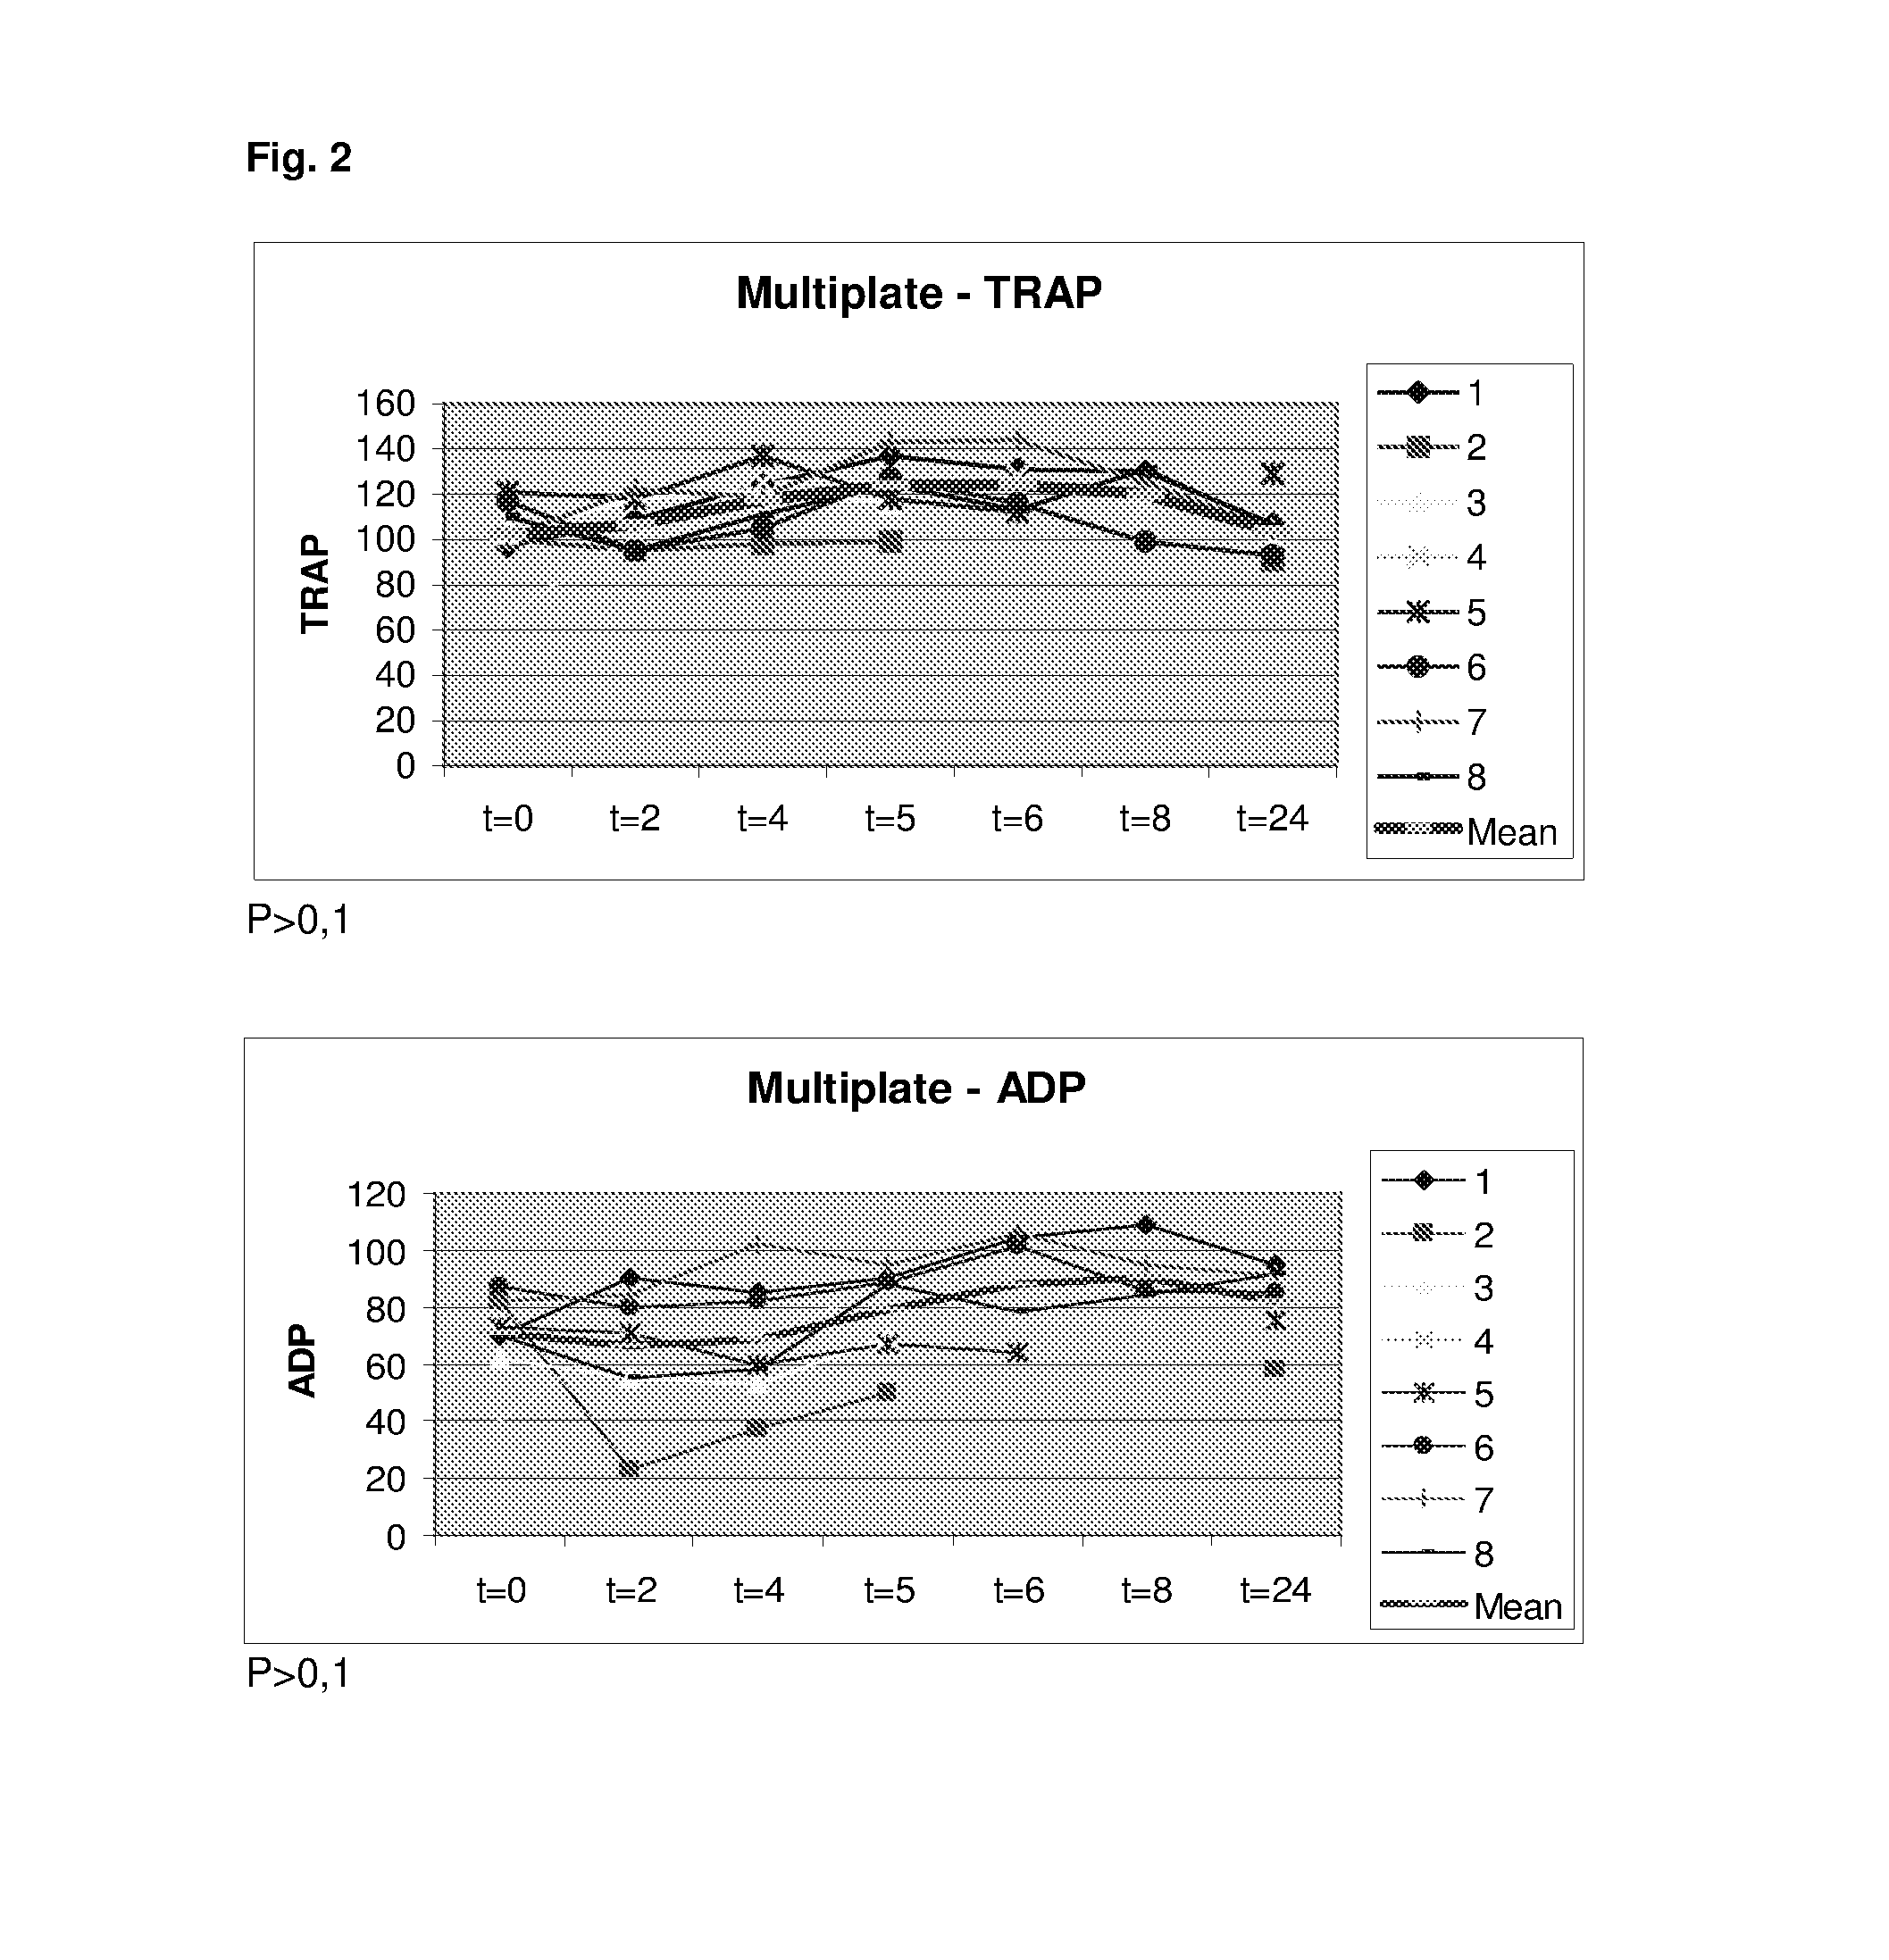 Prostacyclin and analogs thereof administered during surgery for prevention and treatment of capillary leakage